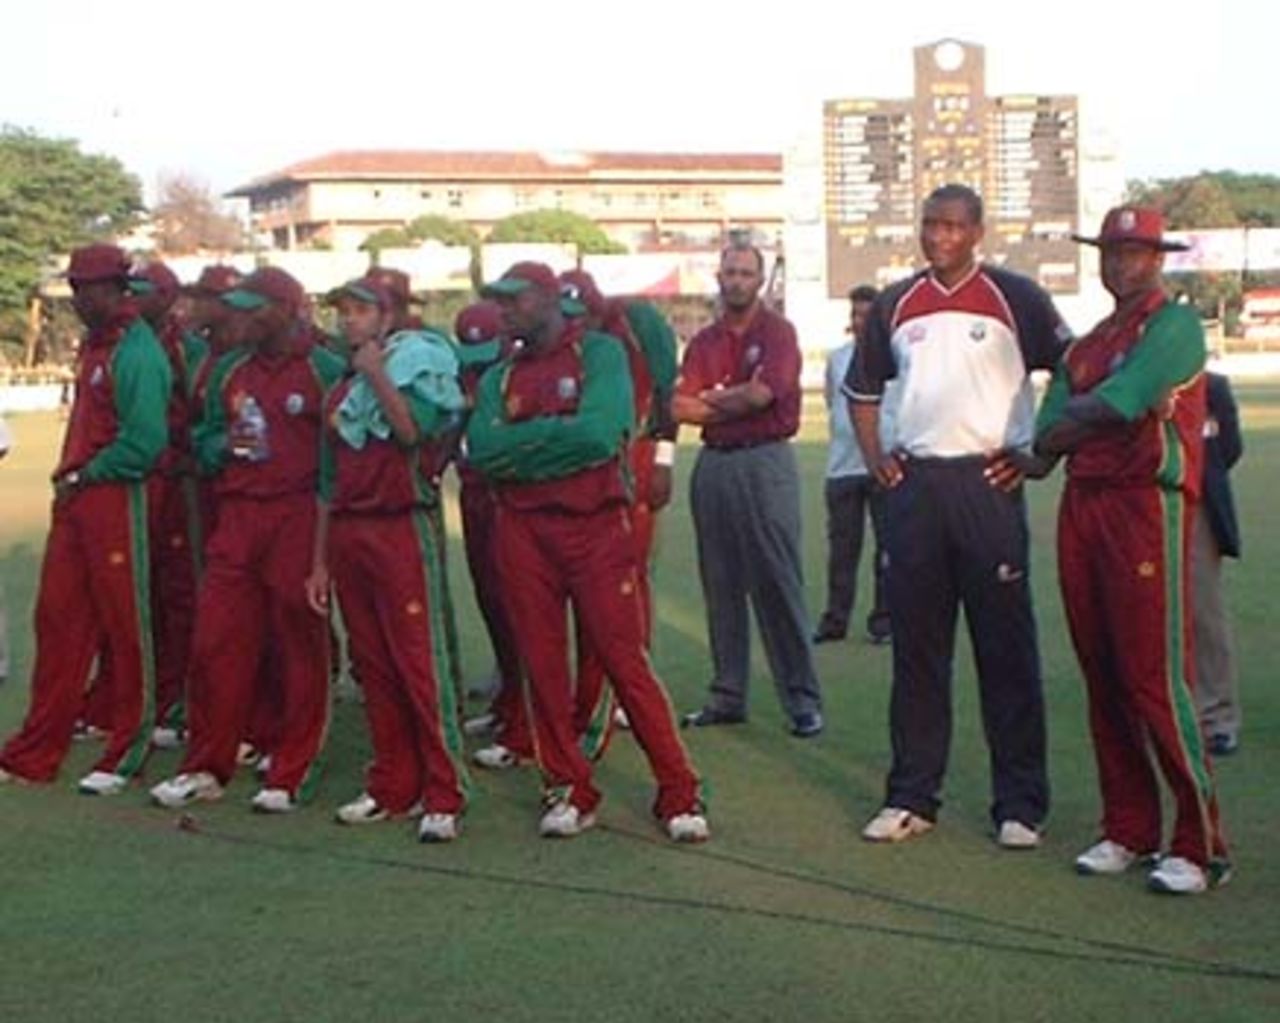 2nd Match: West Indies v Zimbabwe at Sinhalese Sports Club in Colombo LG Abans Triangular Series Dec 2001.